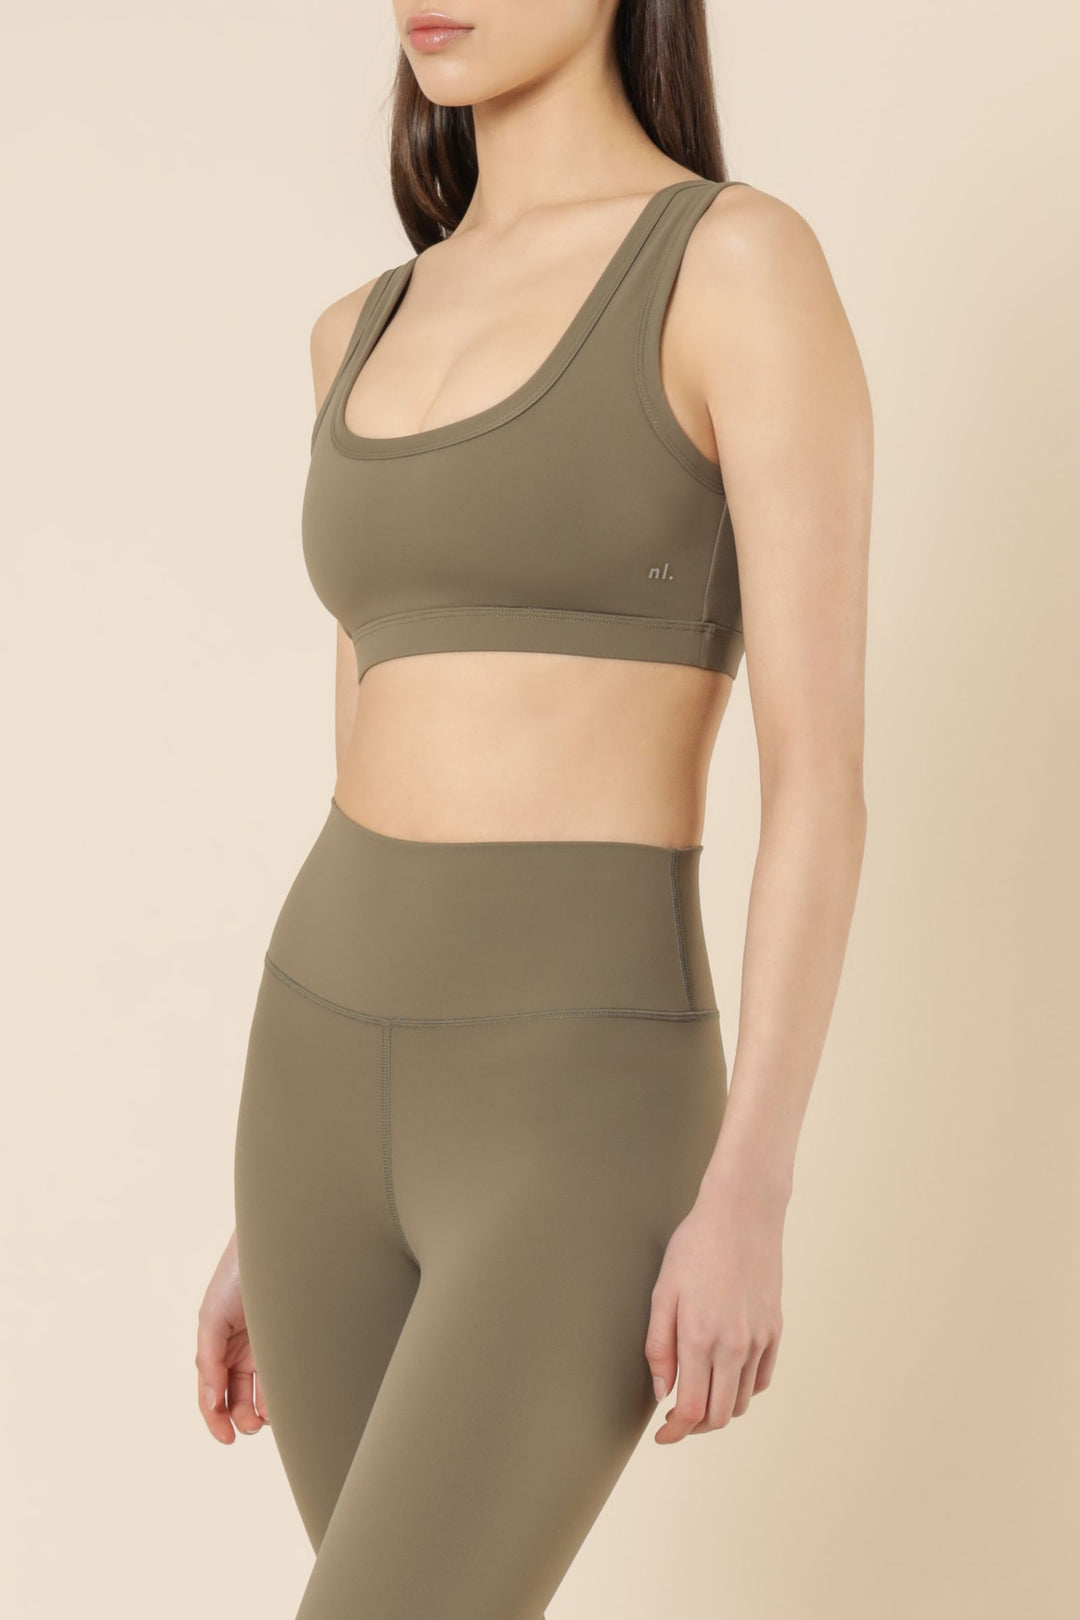 Nude Lucy Active Top - OLIVE activewear nude lucy   